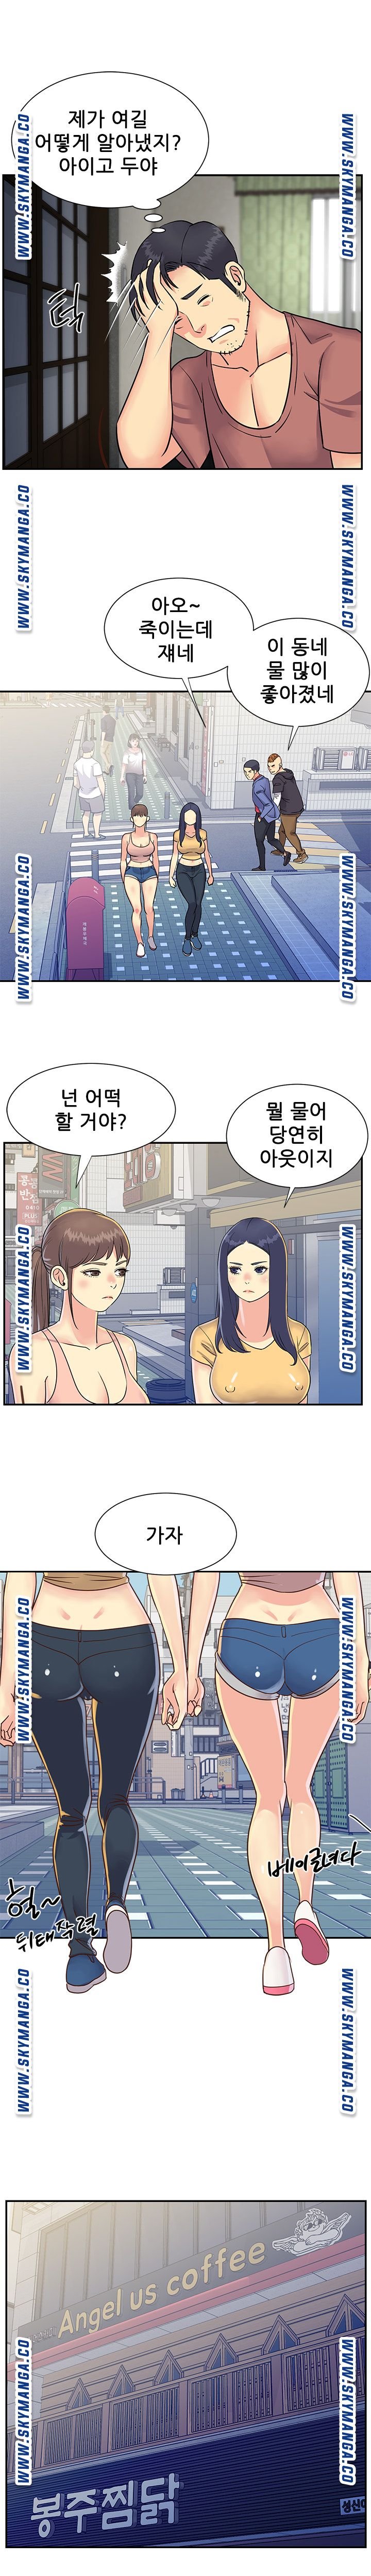 two-sisters-raw-chap-22-5